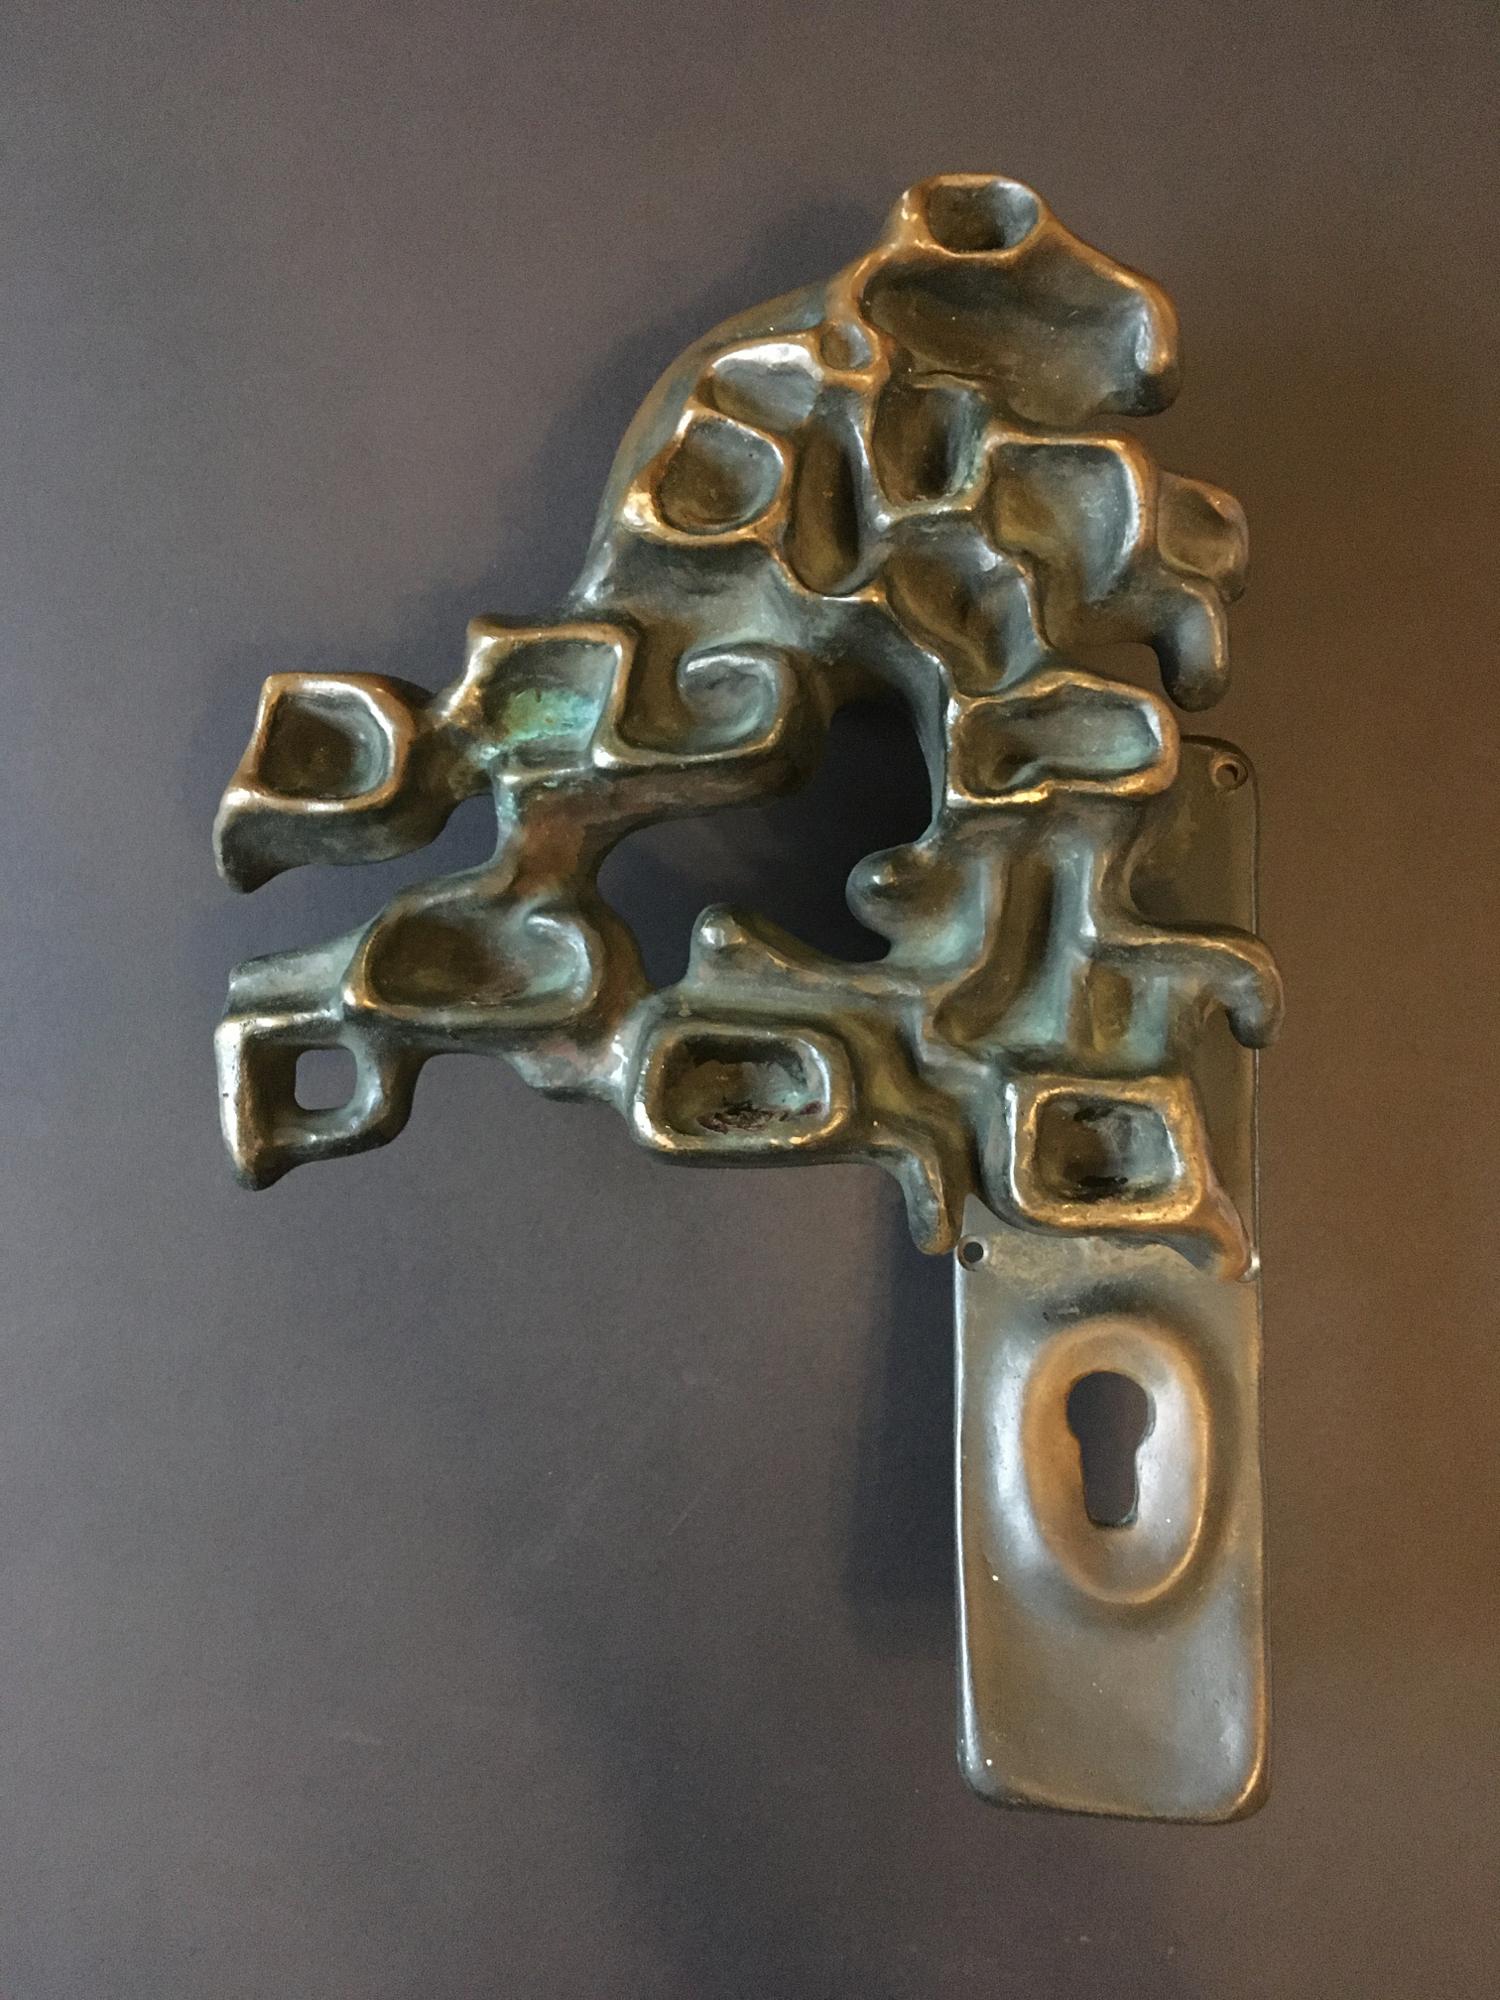 Large bronze door handle in organic form, nicely sculpted and cast, on a rectangular plate with securing bolt to reverse. Found in Germany, dated 1980.

Good vintage condition with minor wear from age and use, and a heavy patina, including some old